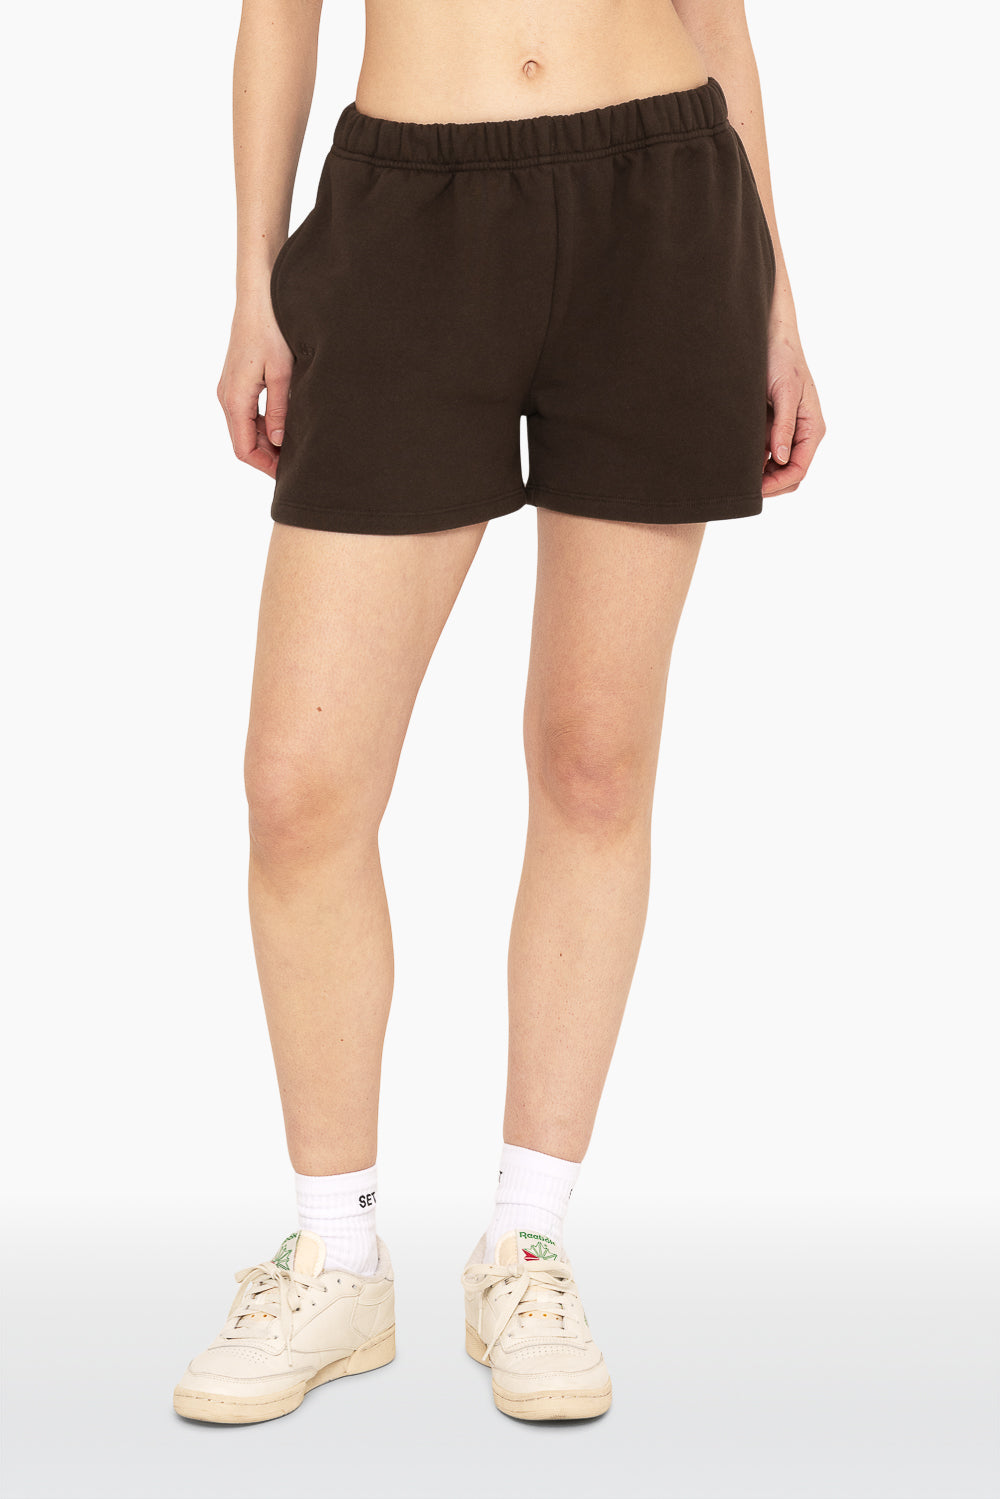 SET™ EMBROIDERED HEAVYWEIGHT SWEATS SWEAT SHORTS IN ESPRESSO